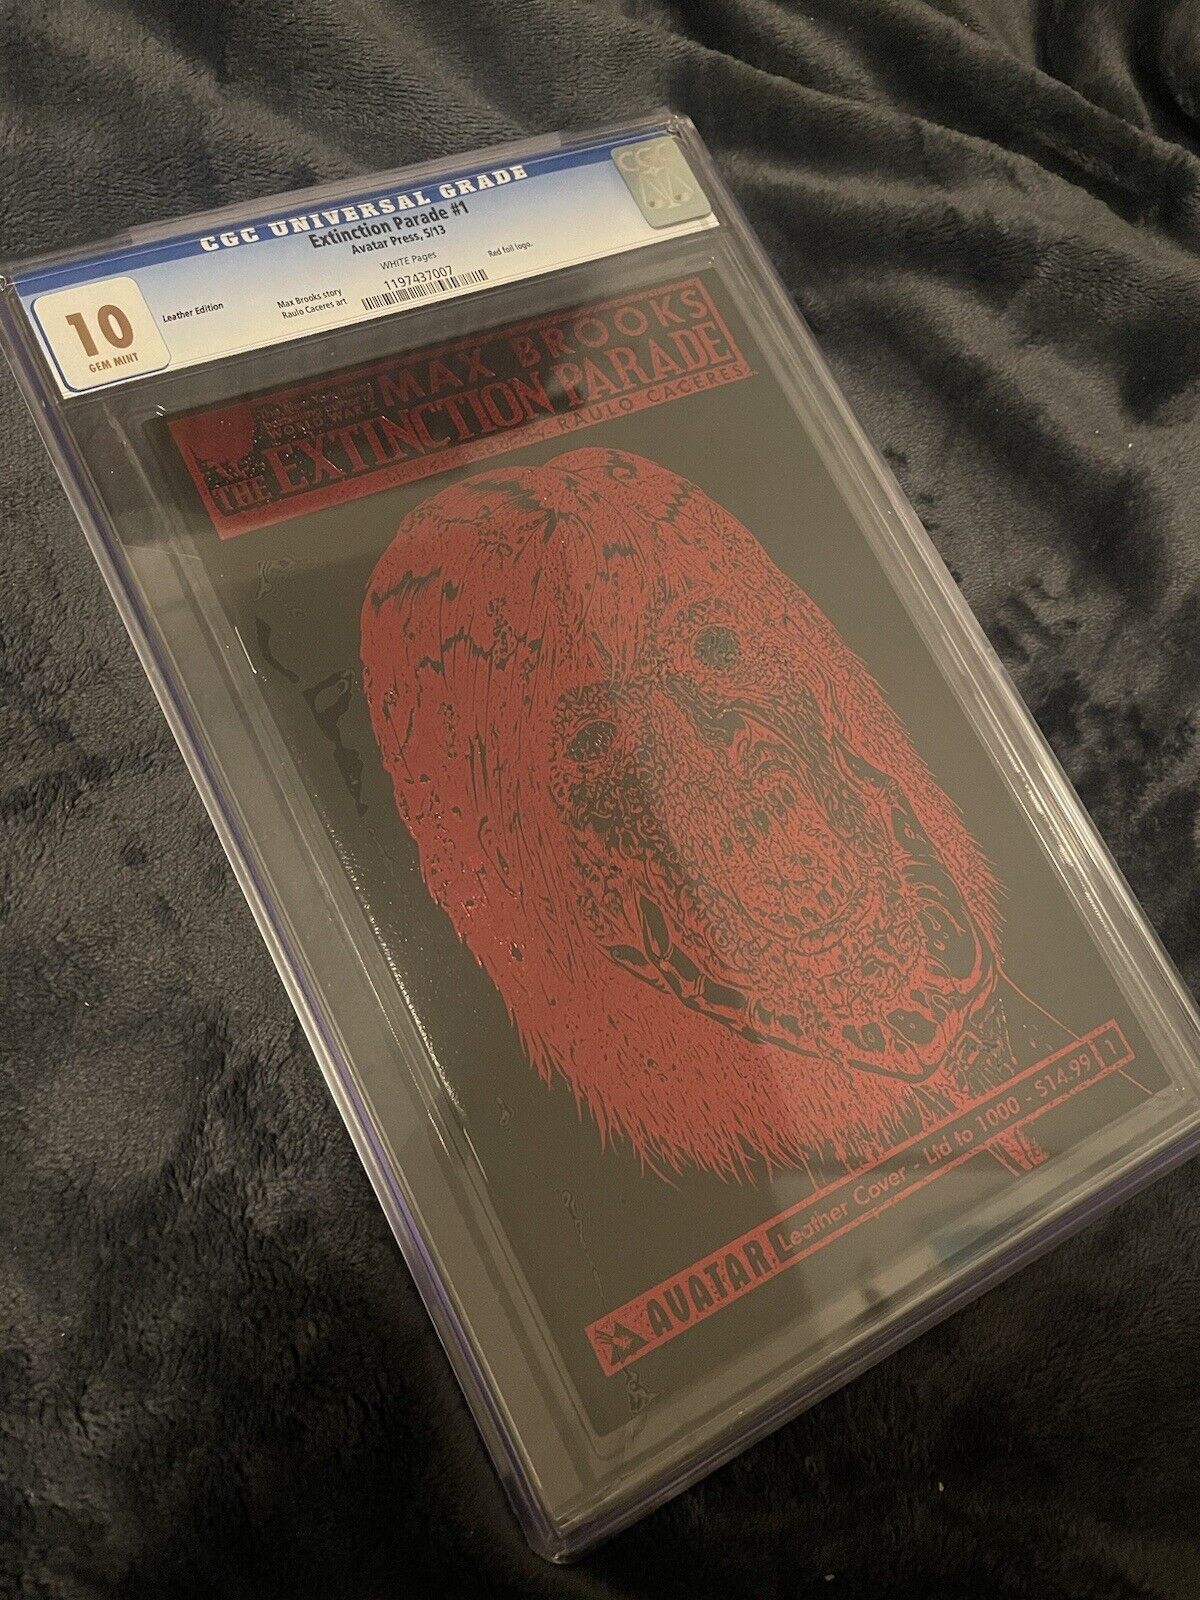 Extinction Parade #1 CGC 10.0 Gem Mint Red Foil Leather only 1,000 copies made